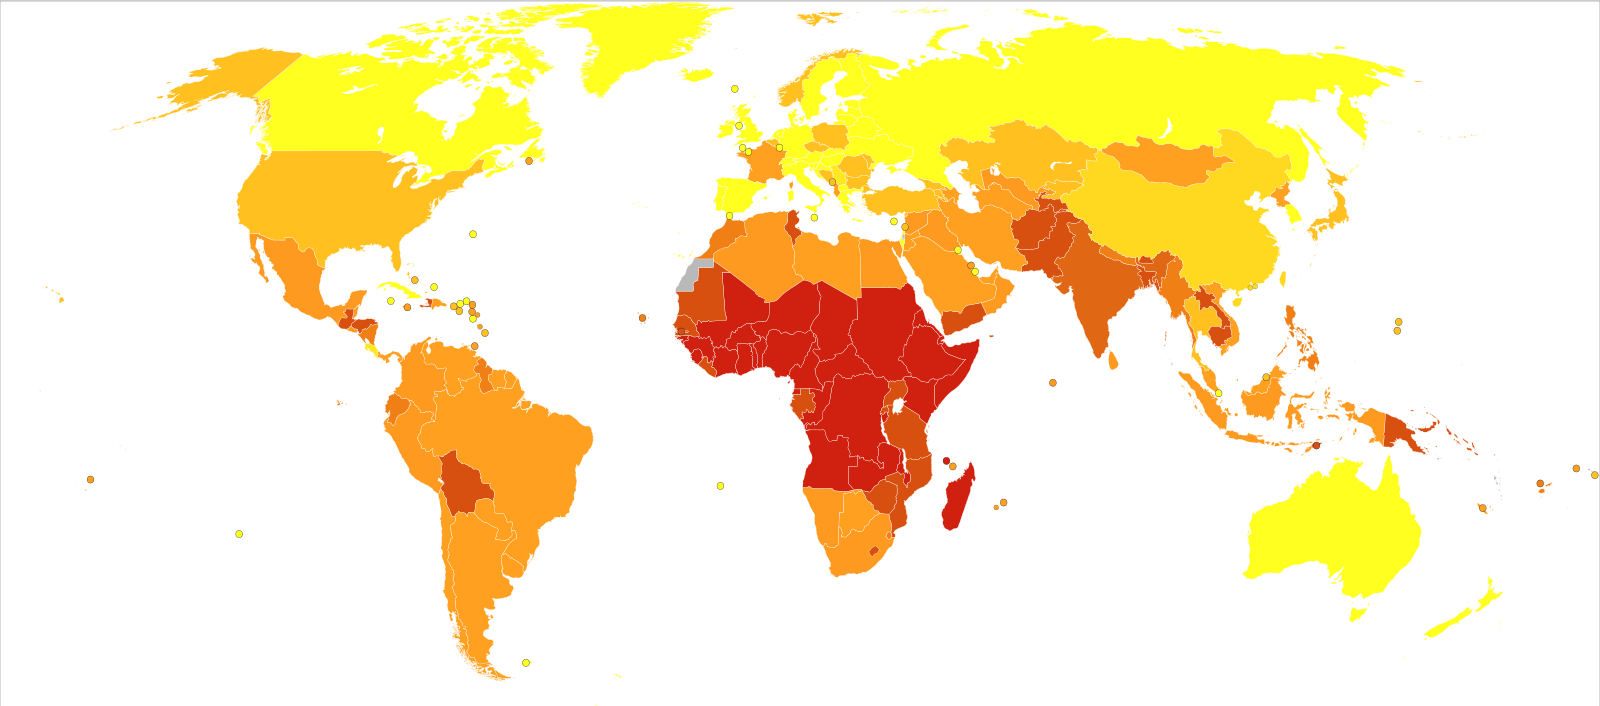 File:Protein-energy malnutrition world map-DALYs per million persons-WHO2012.svg.png